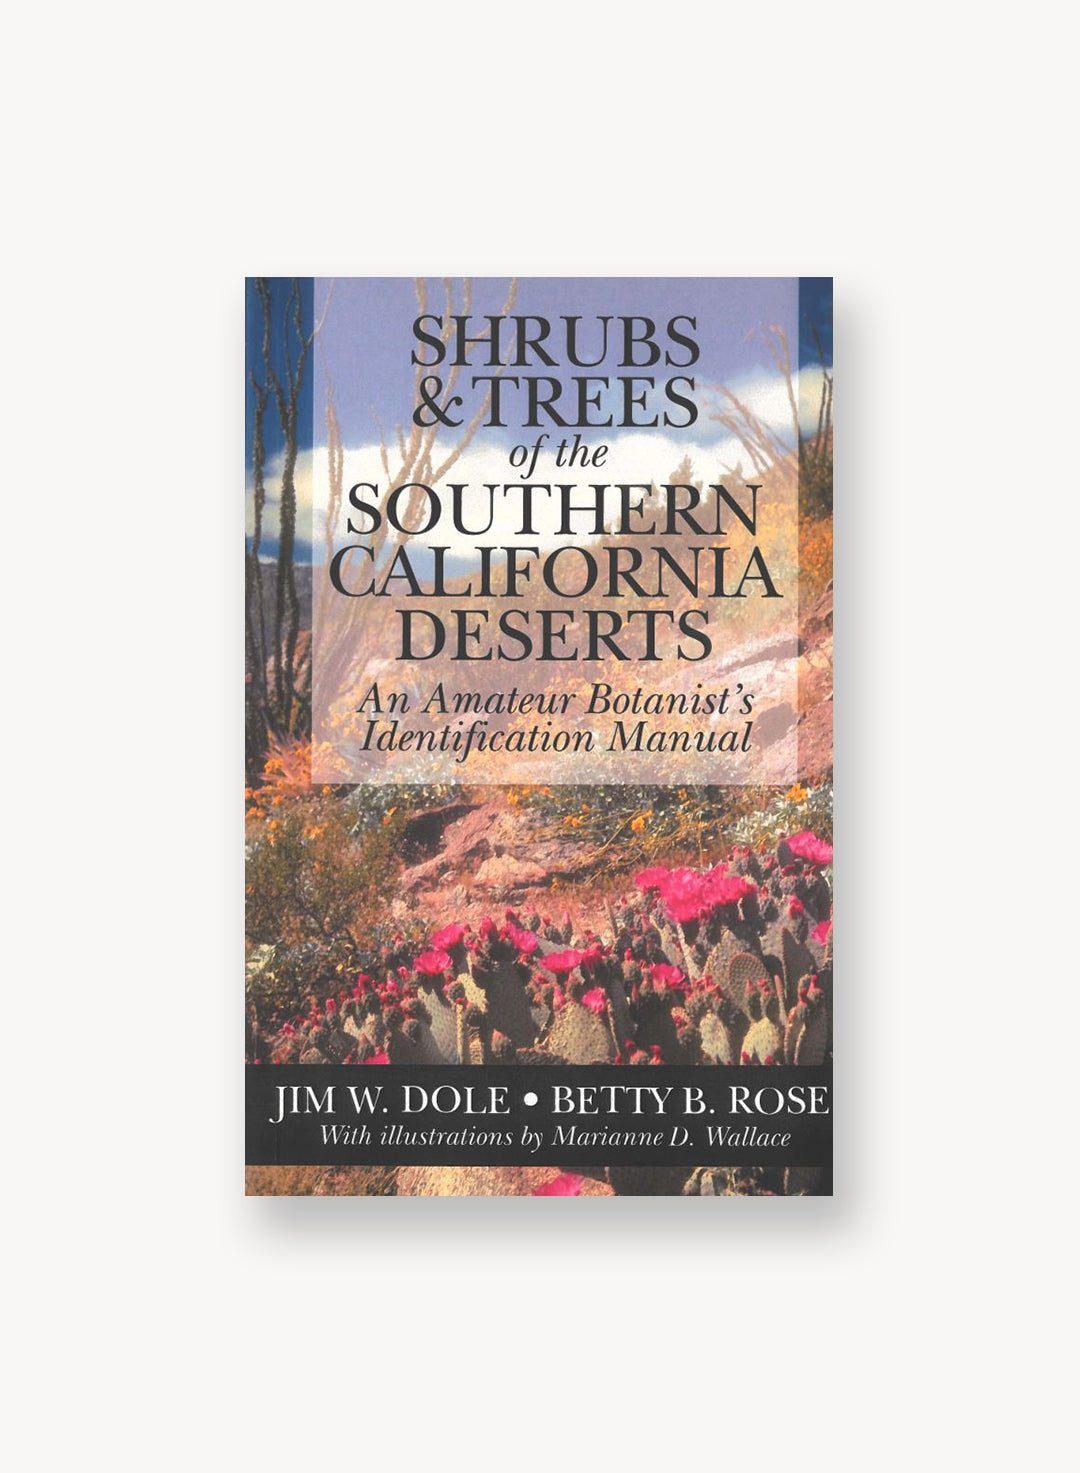 Shrubs & Trees of the Southern California Deserts